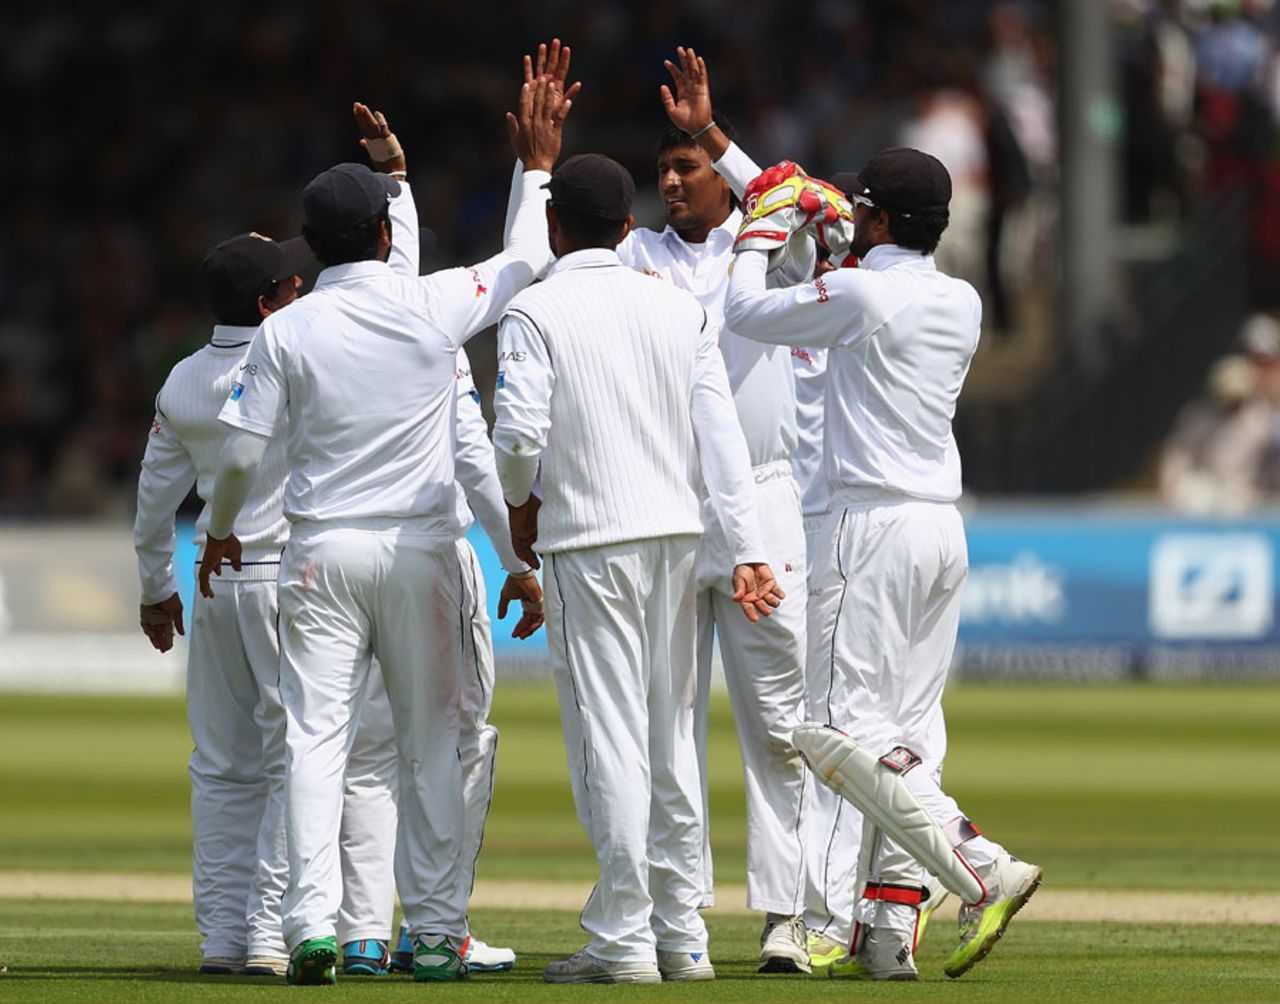 Suranga Lakmal picked up the wicket of Stuart Broad, England v Sri Lanka, 3rd Investec Test, Lord's, 2nd day, June 10, 2016